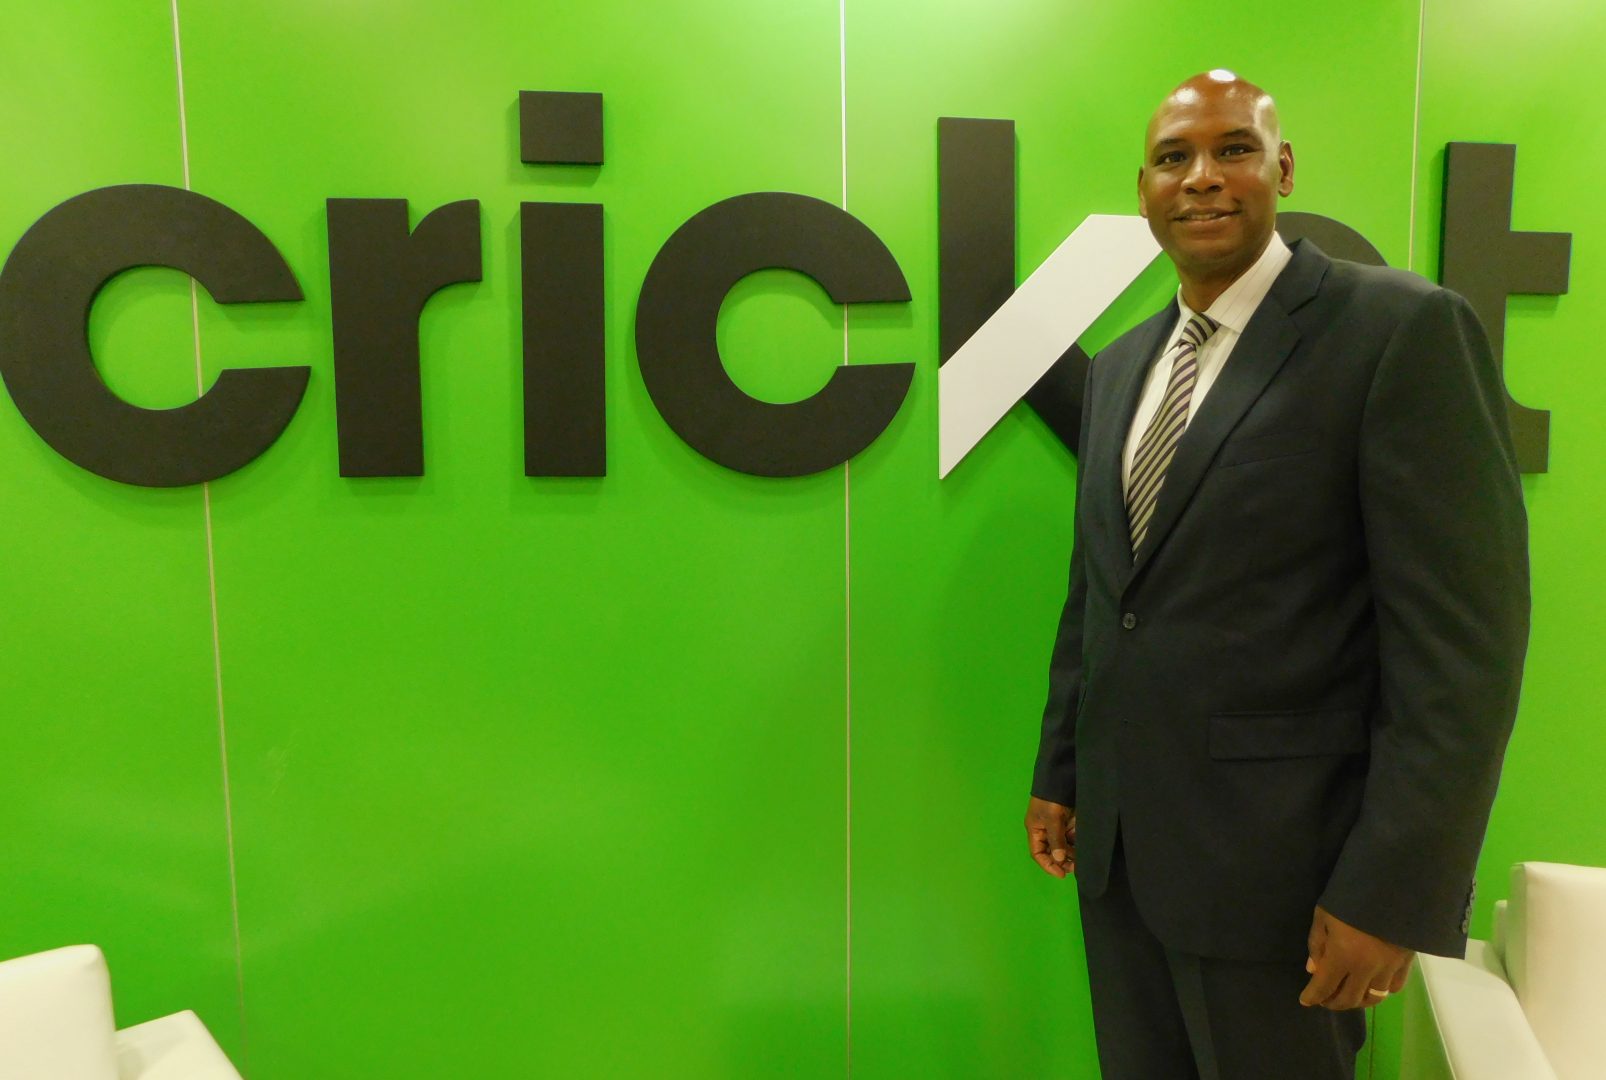 George Cleveland of Cricket Wireless discusses the impact of diversity